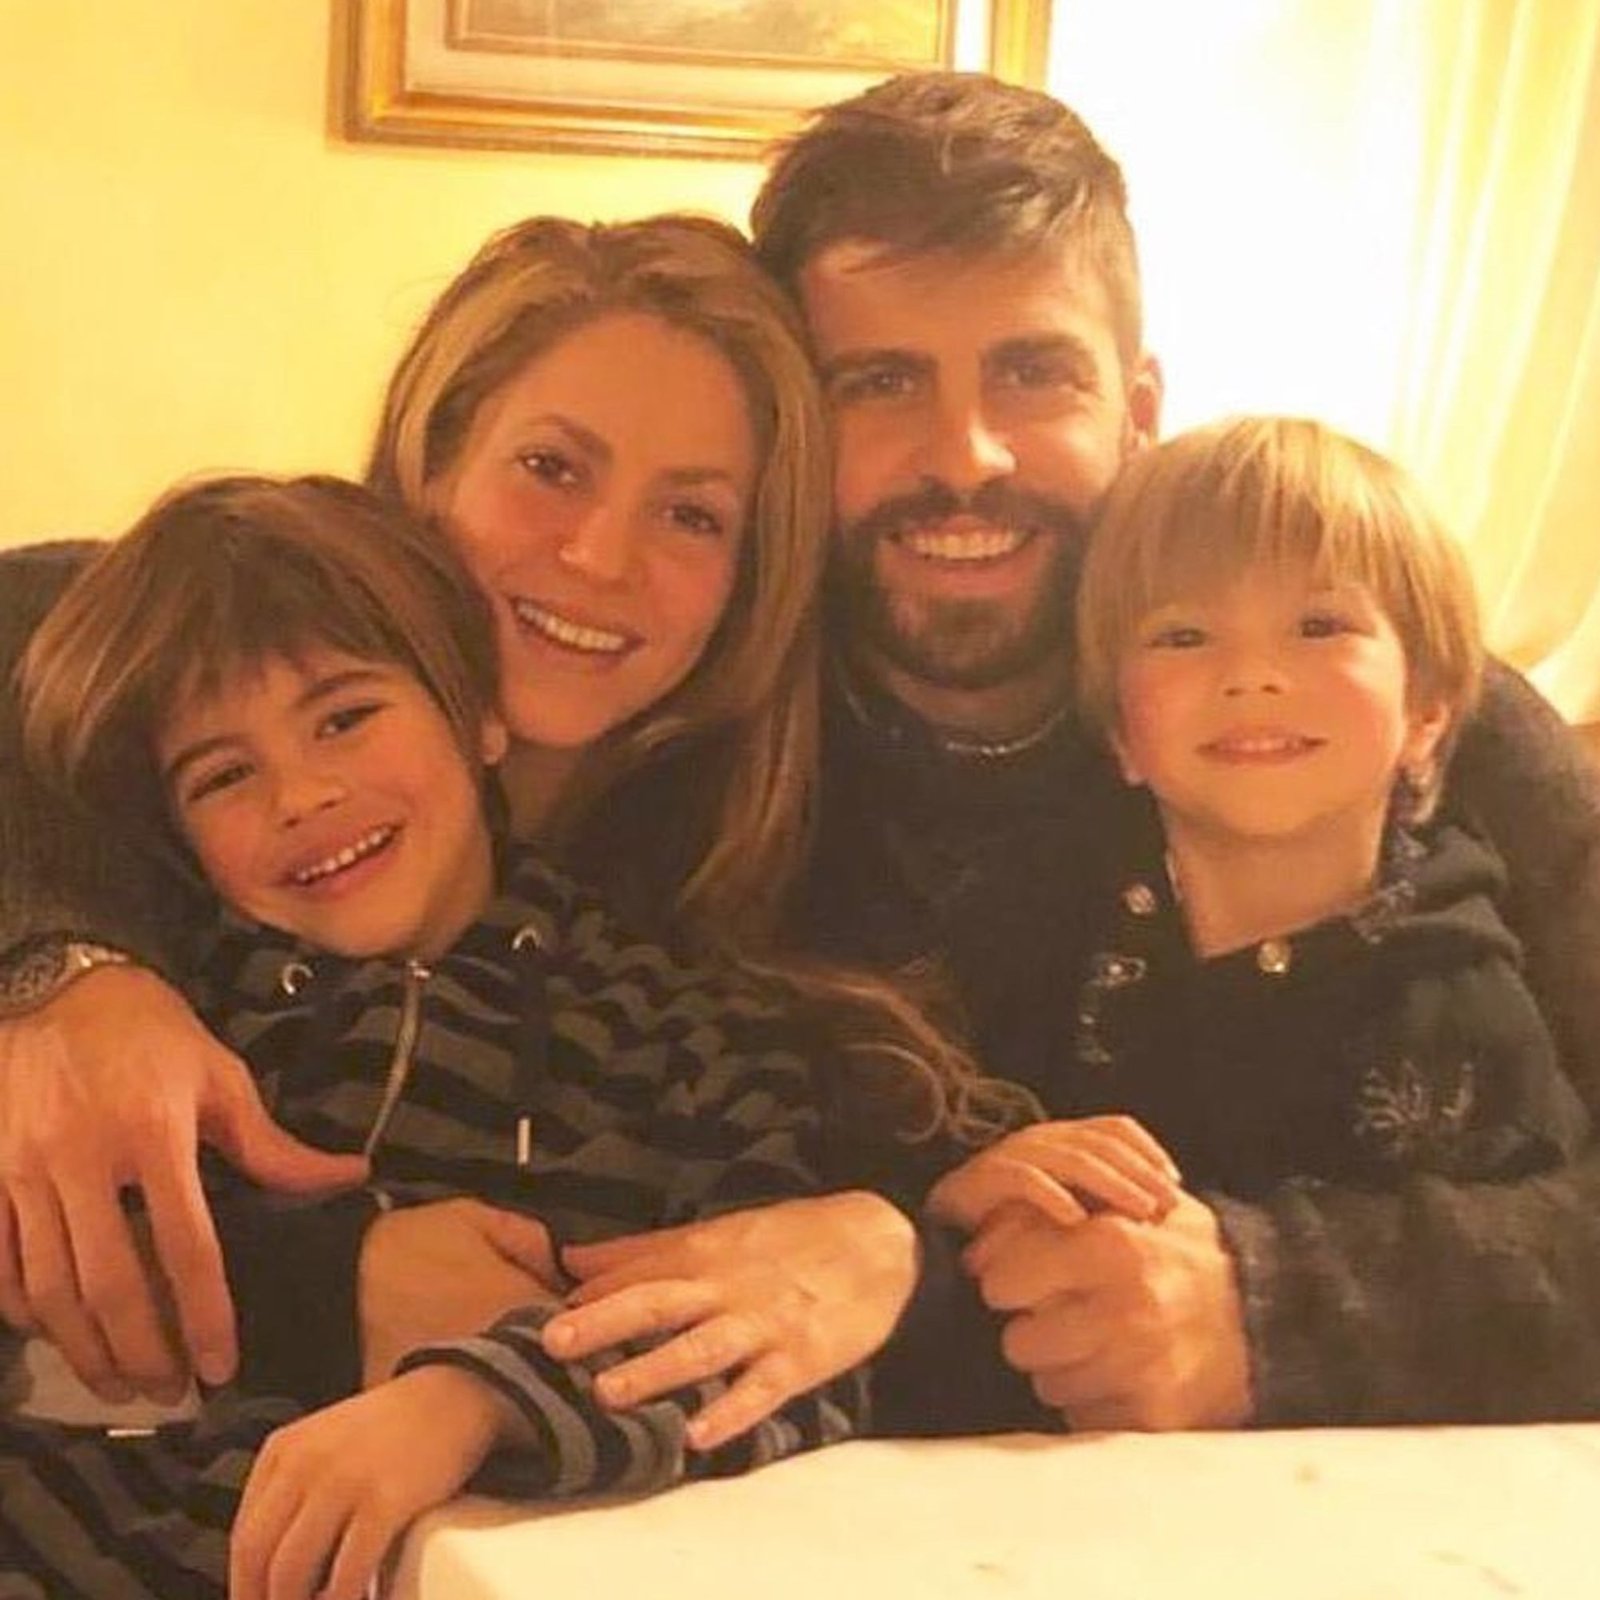 Gerard Piqué shared photos with his grown sons and Shakira: "The 3 musketeers"